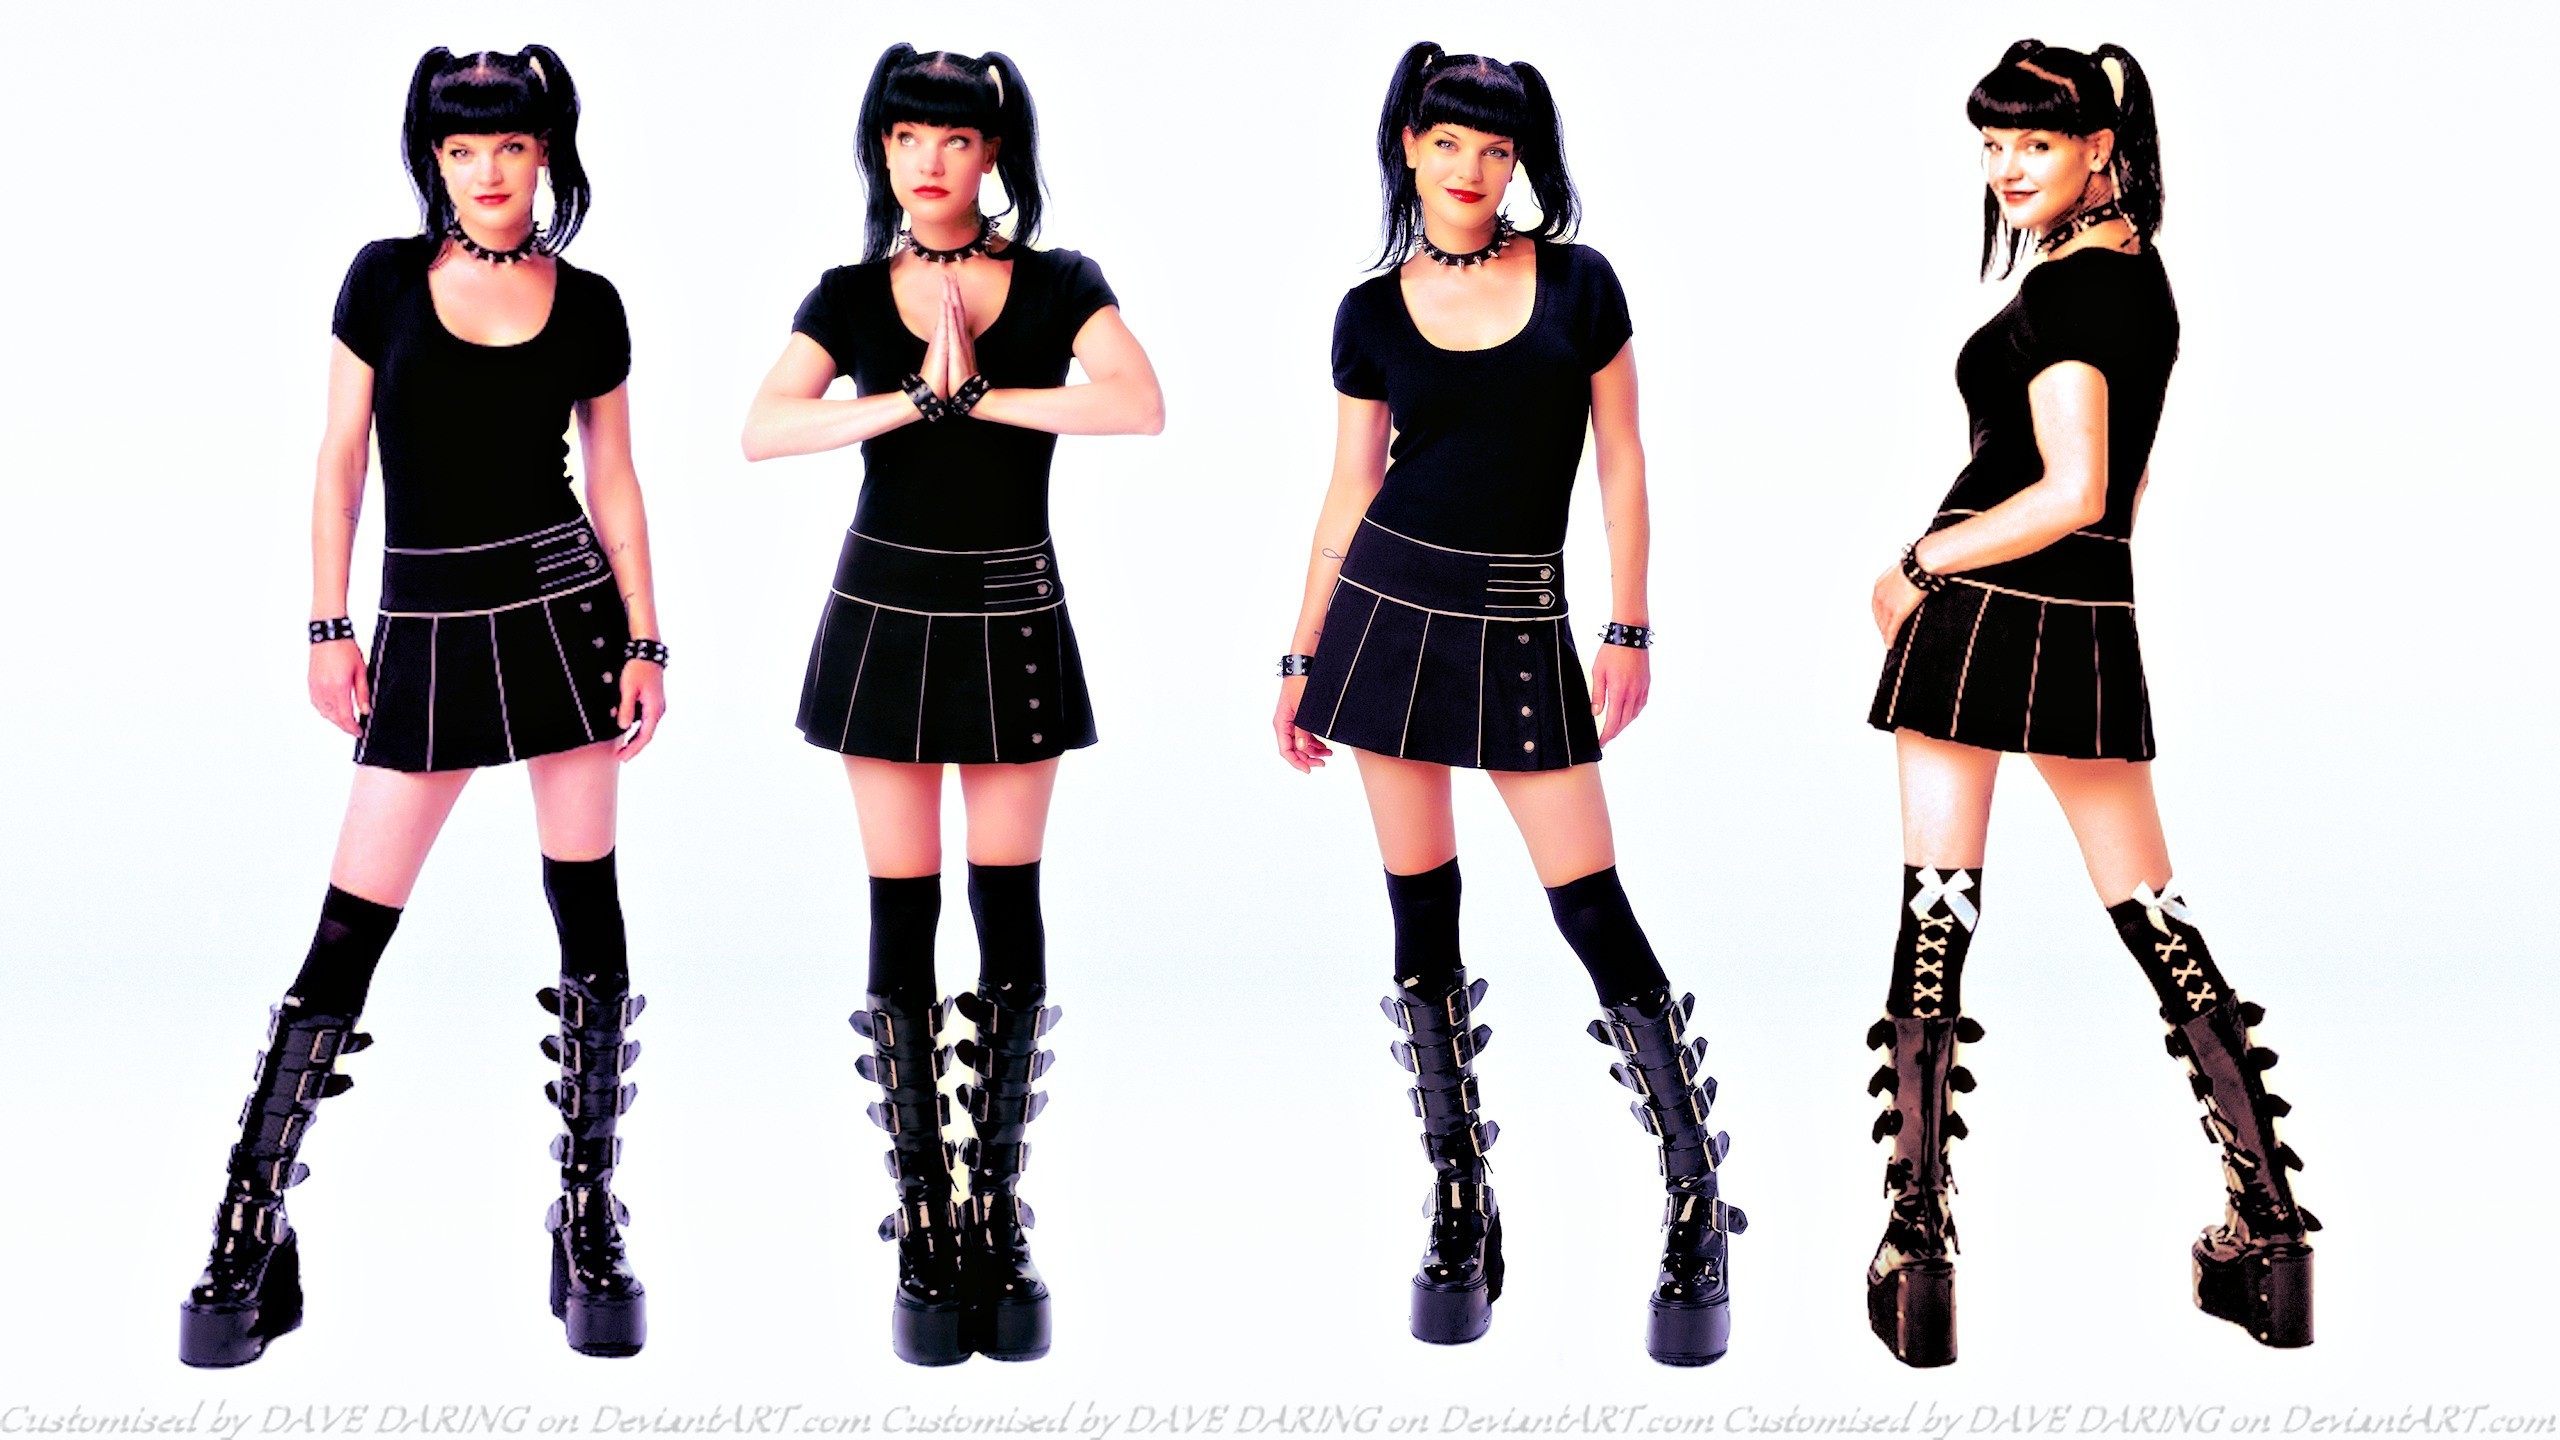 2560x1440 ... Pauley Perrette The Four Abigails by Dave-Daring